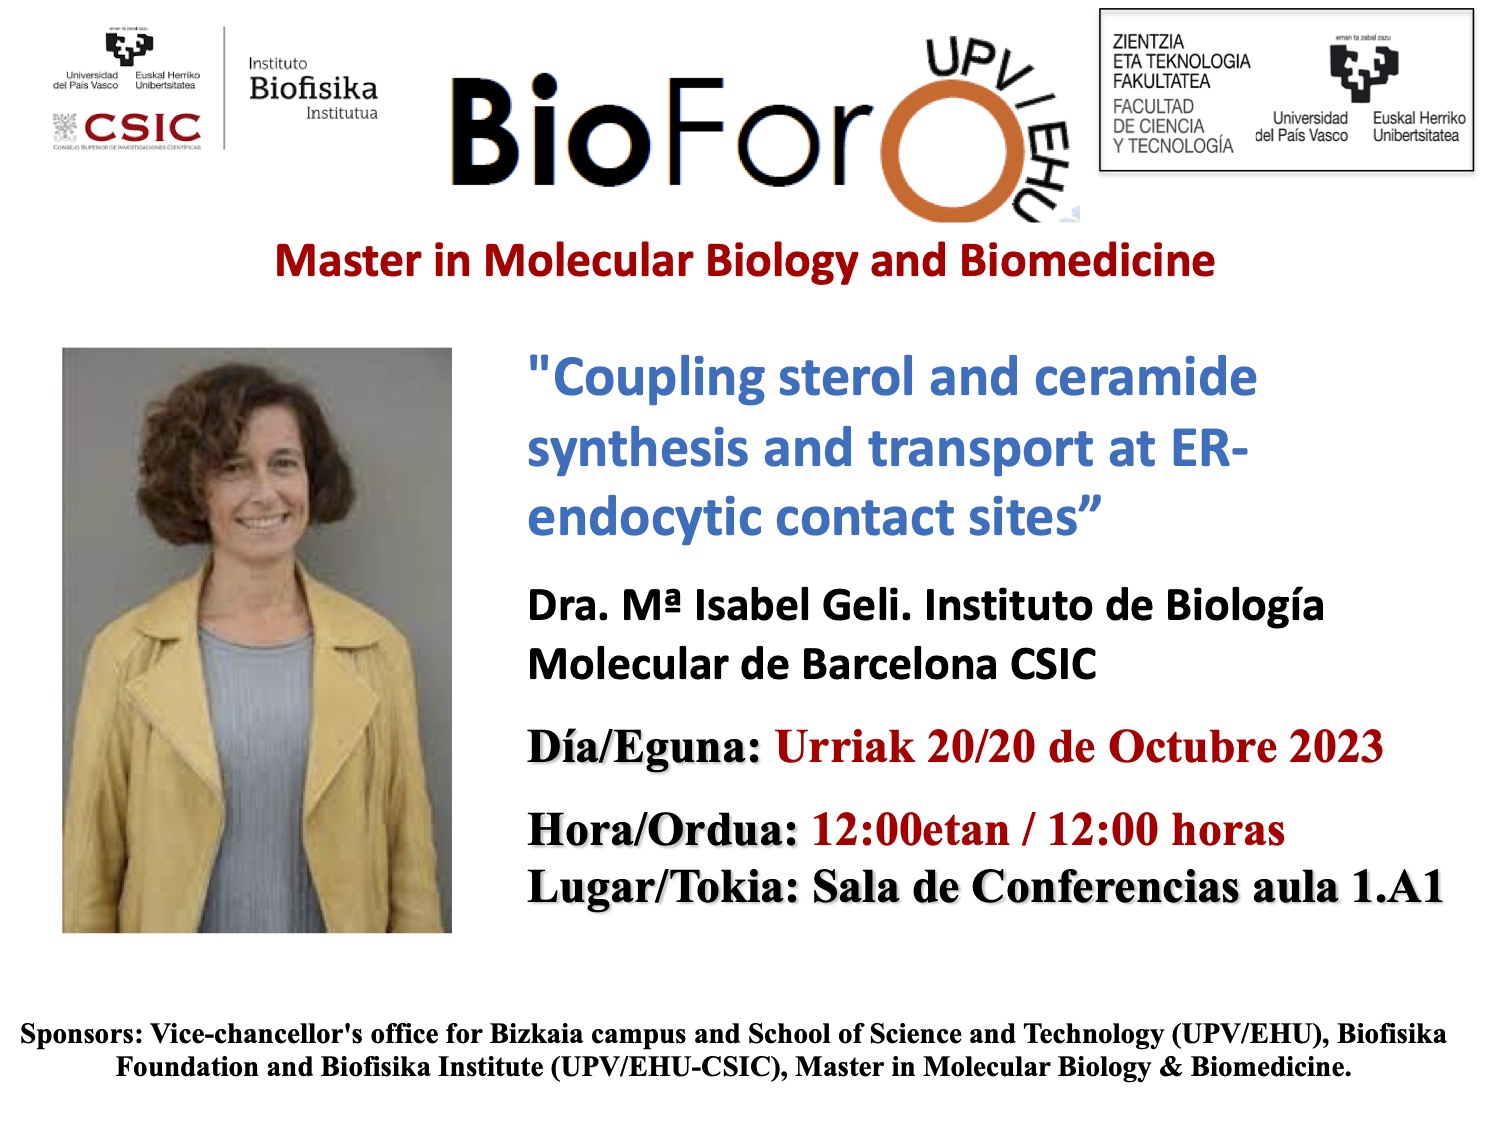 BioForo seminar: "Coupling sterol and ceramide synthesis and transport at ER-endocytic contact sites"